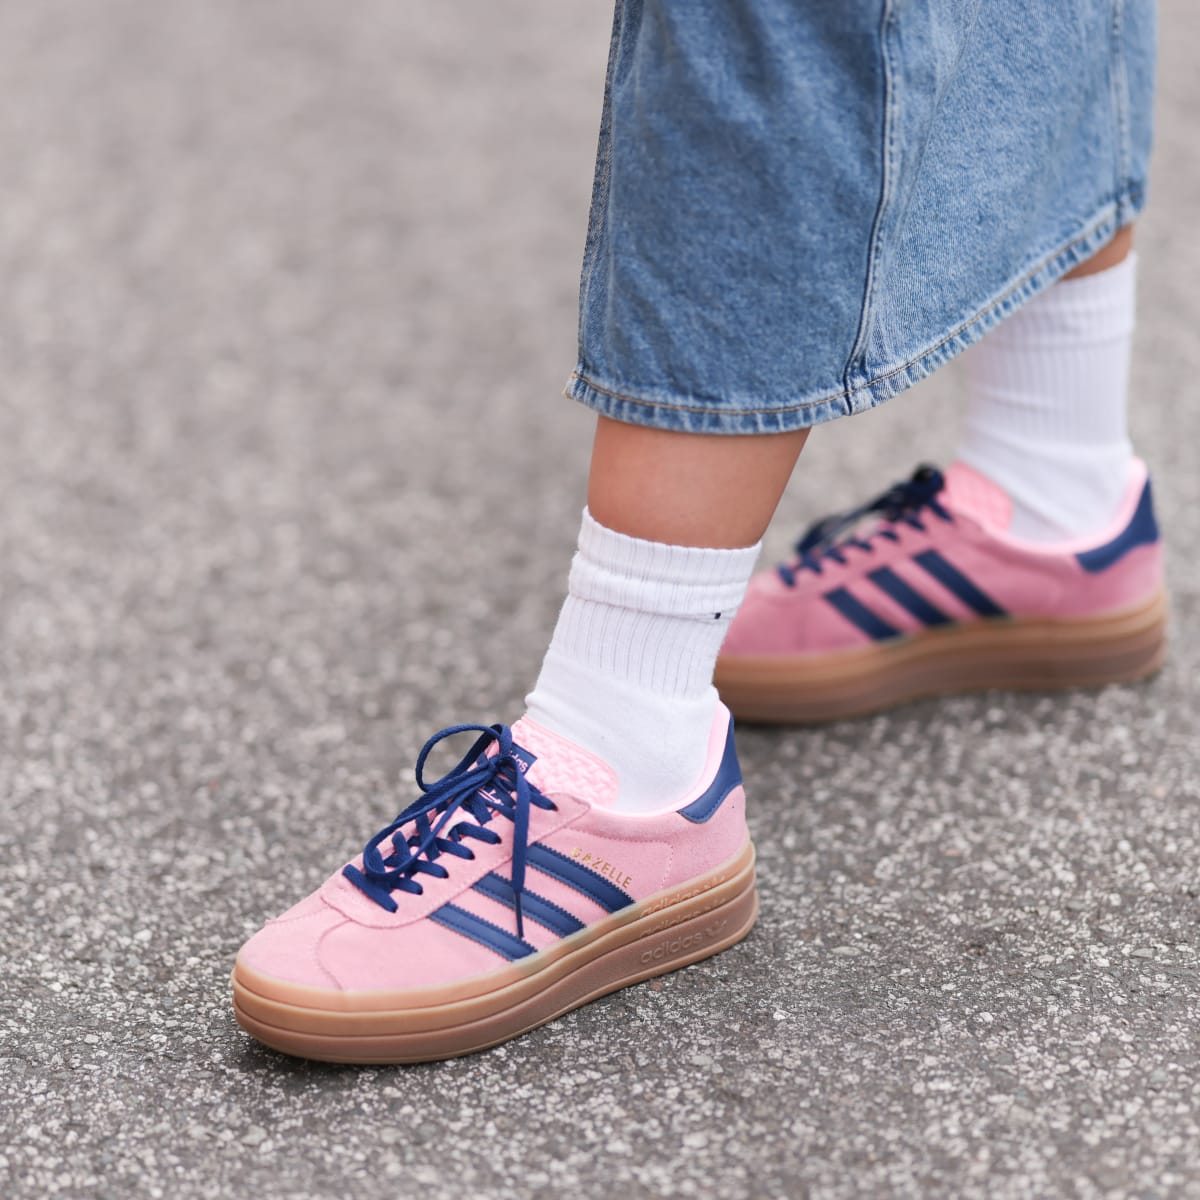 Teen Sneaker Trends Your Teens Will Have on Their Wish Lists This Year